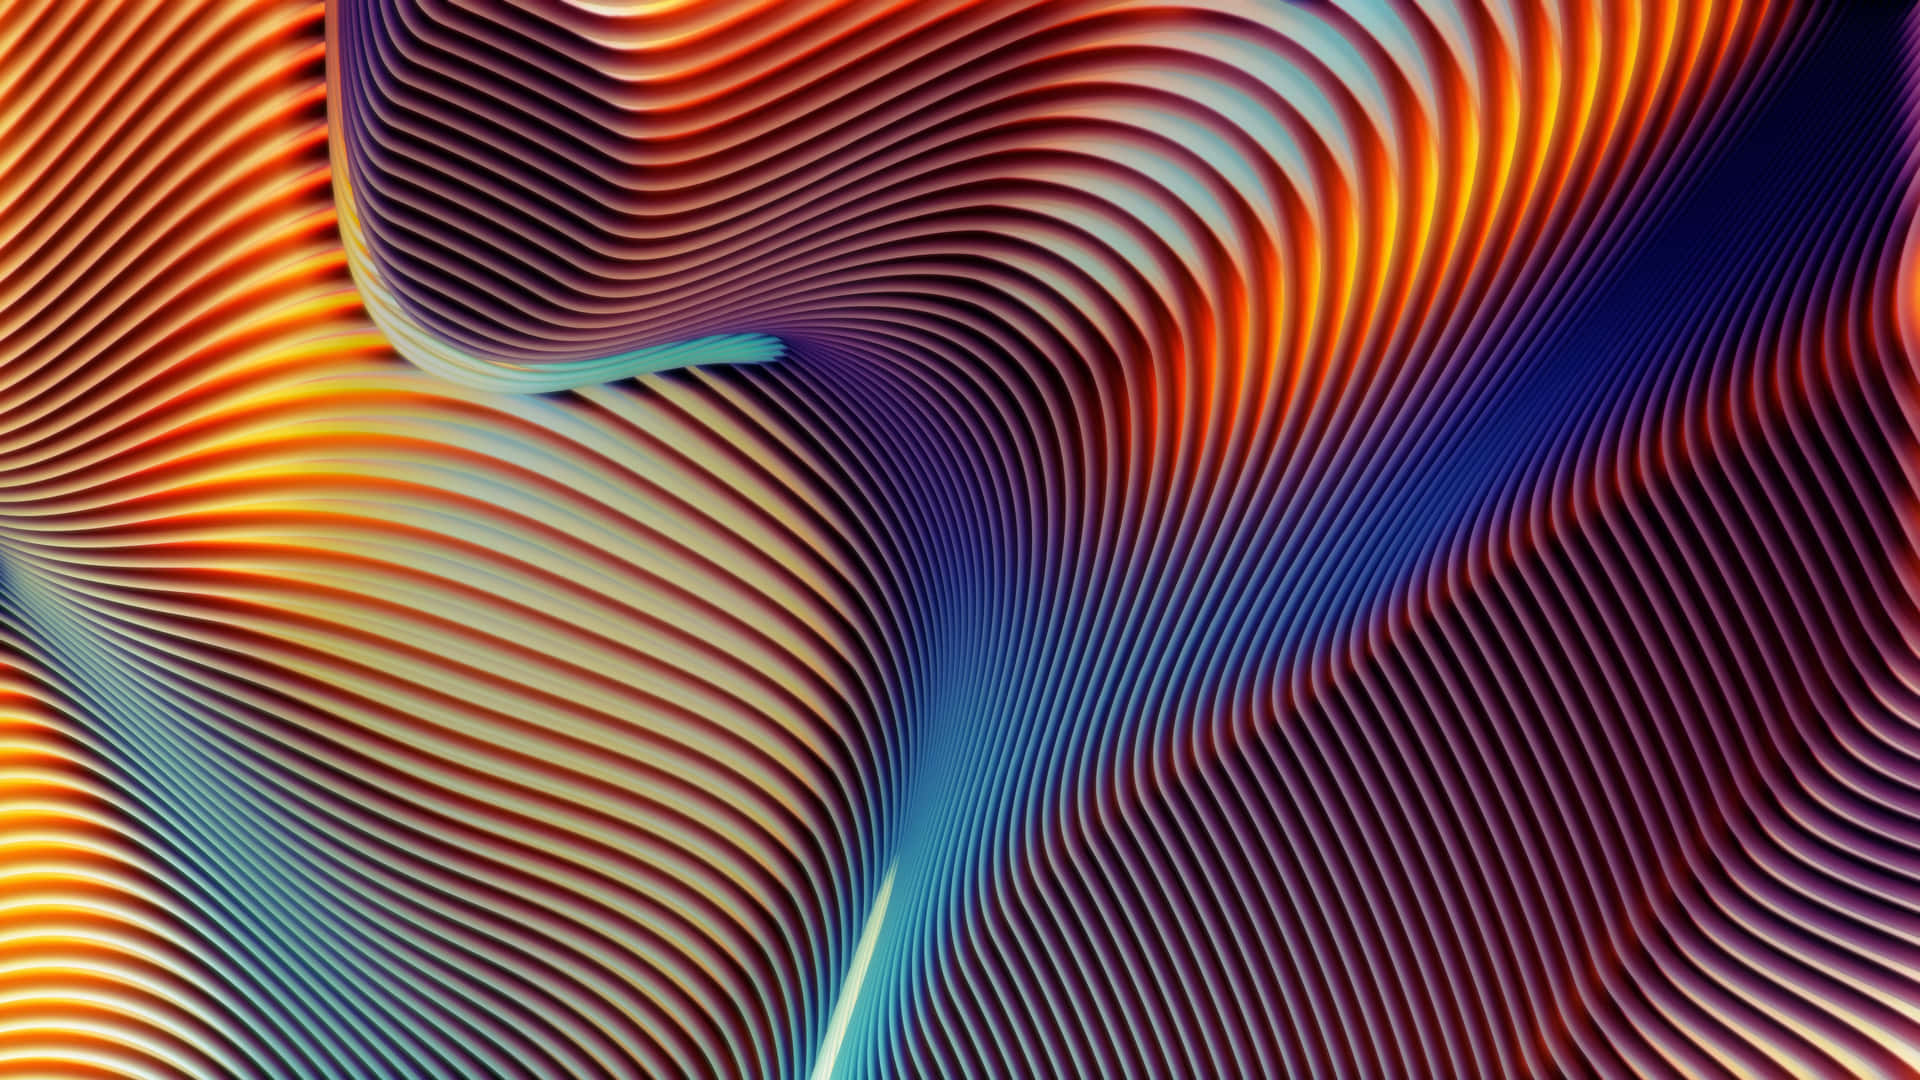 A Colorful Abstract Background With Wavy Lines Wallpaper